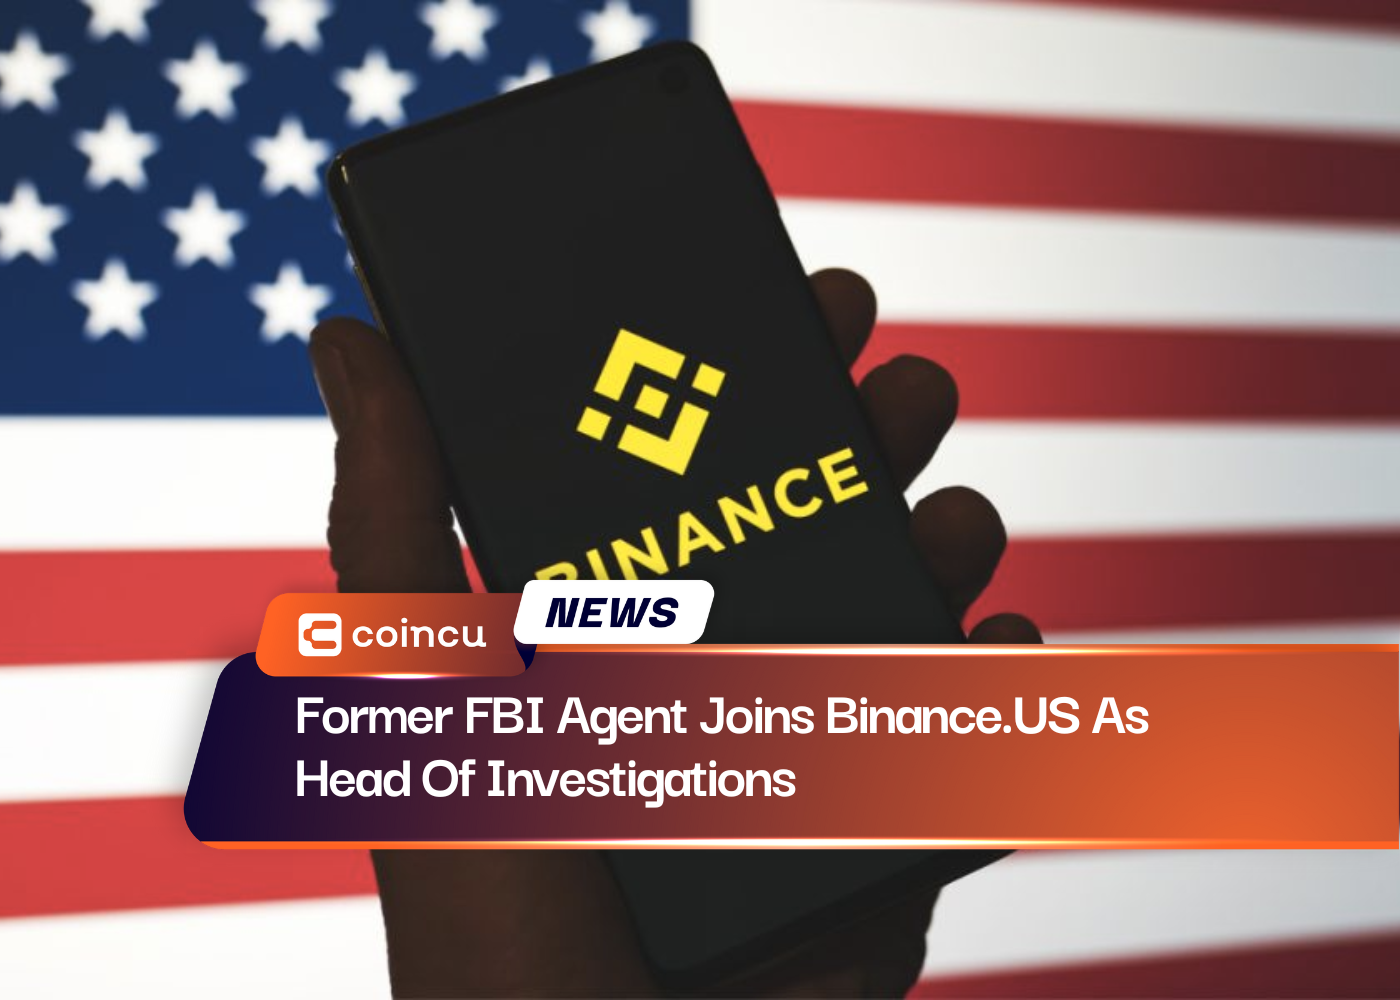 Former FBI Agent Joins Binance.US As Head Of Investigations